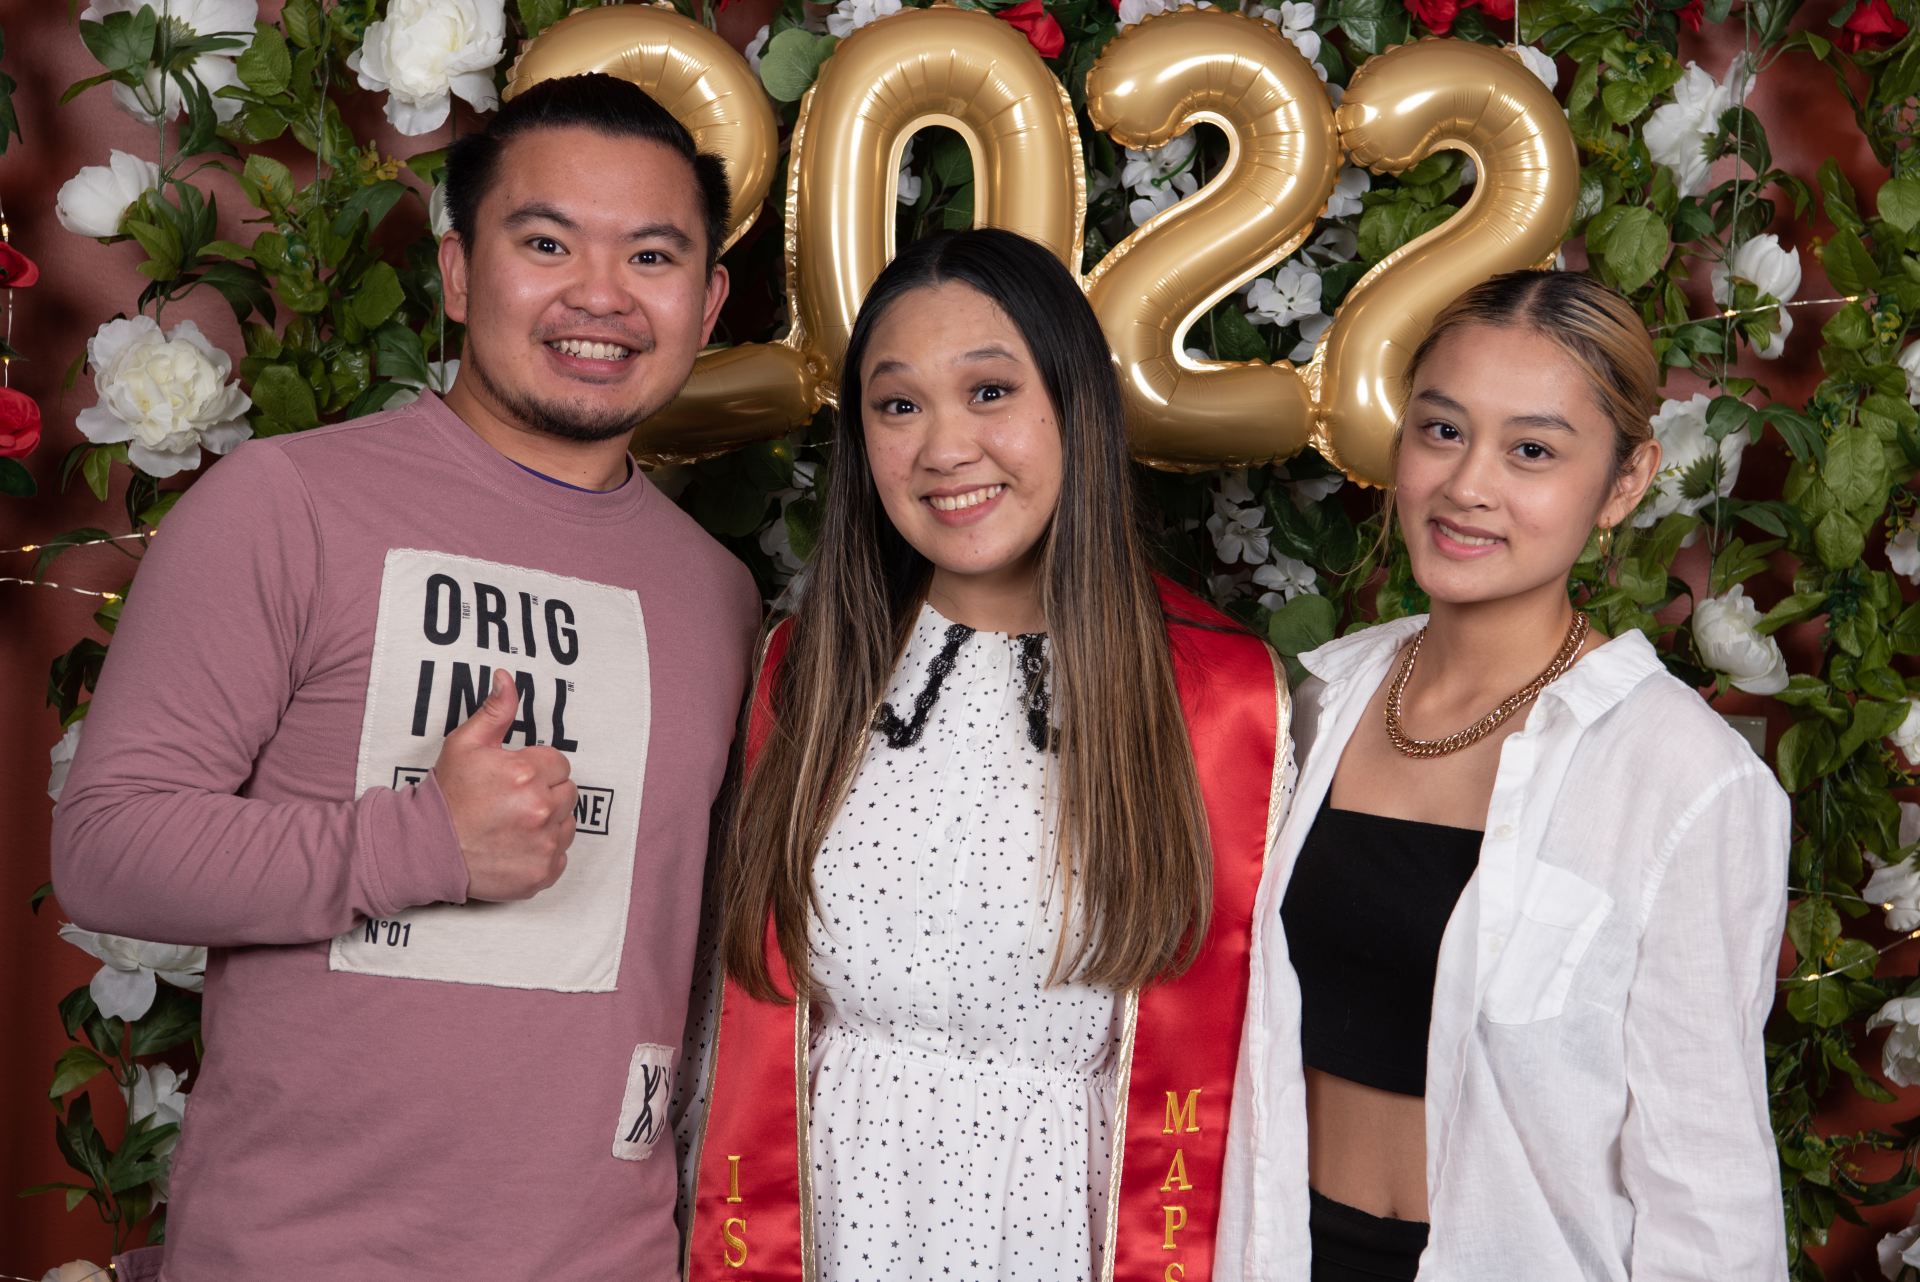 A graduate stands in the middle while two others pose with side by side.